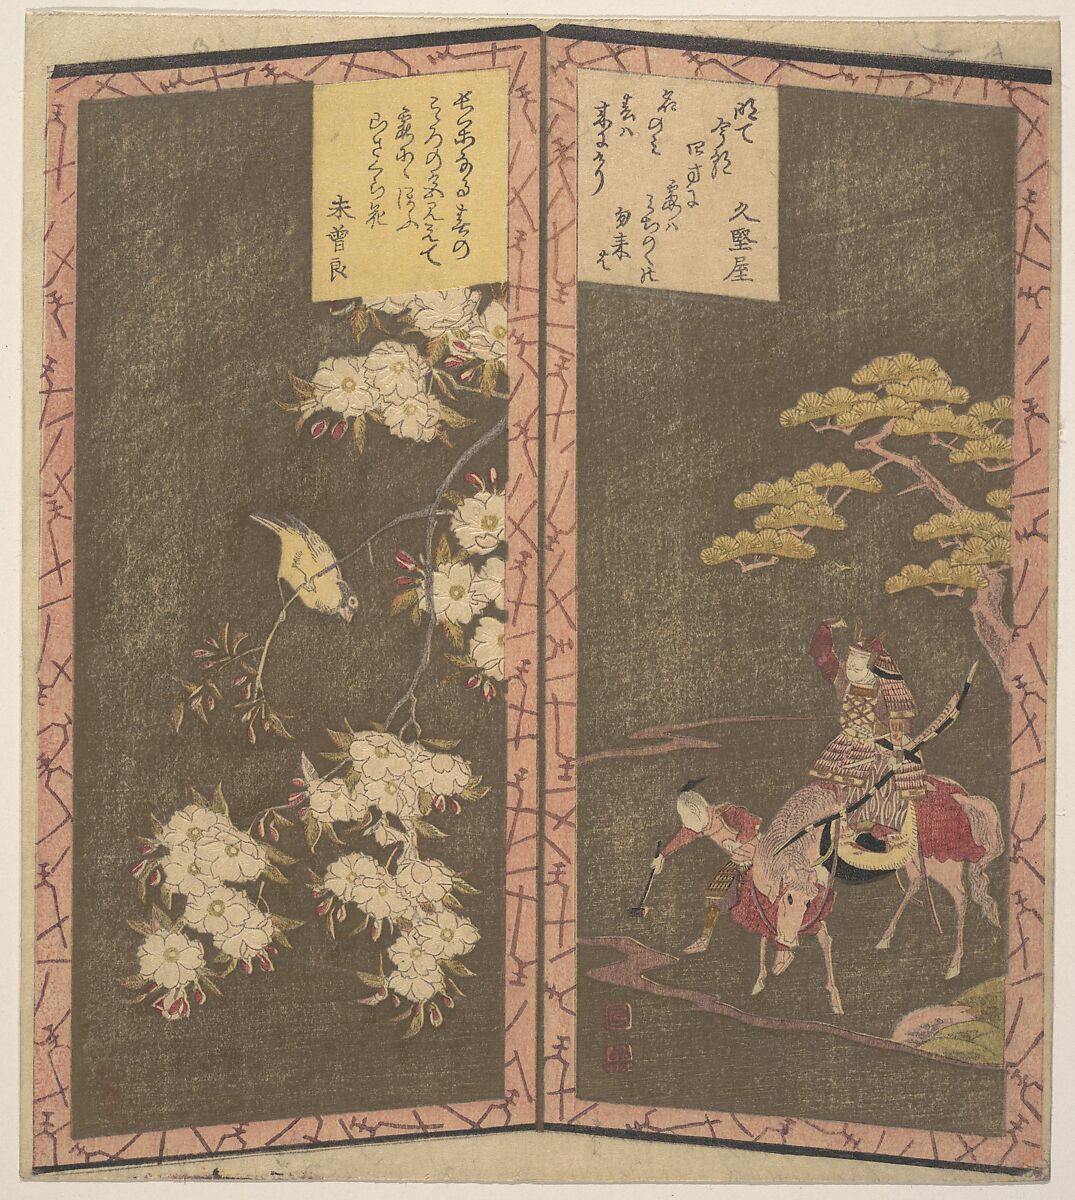 Left: Bird on Branch of a Cherry Tree; Right: Minamotono Yoshiié on Horseback, Ryūryūkyo Shinsai (Japanese, active ca. 1799–1823), Woodblock print (surimono) in shape of a twofold screen; ink and color on paper, Japan 